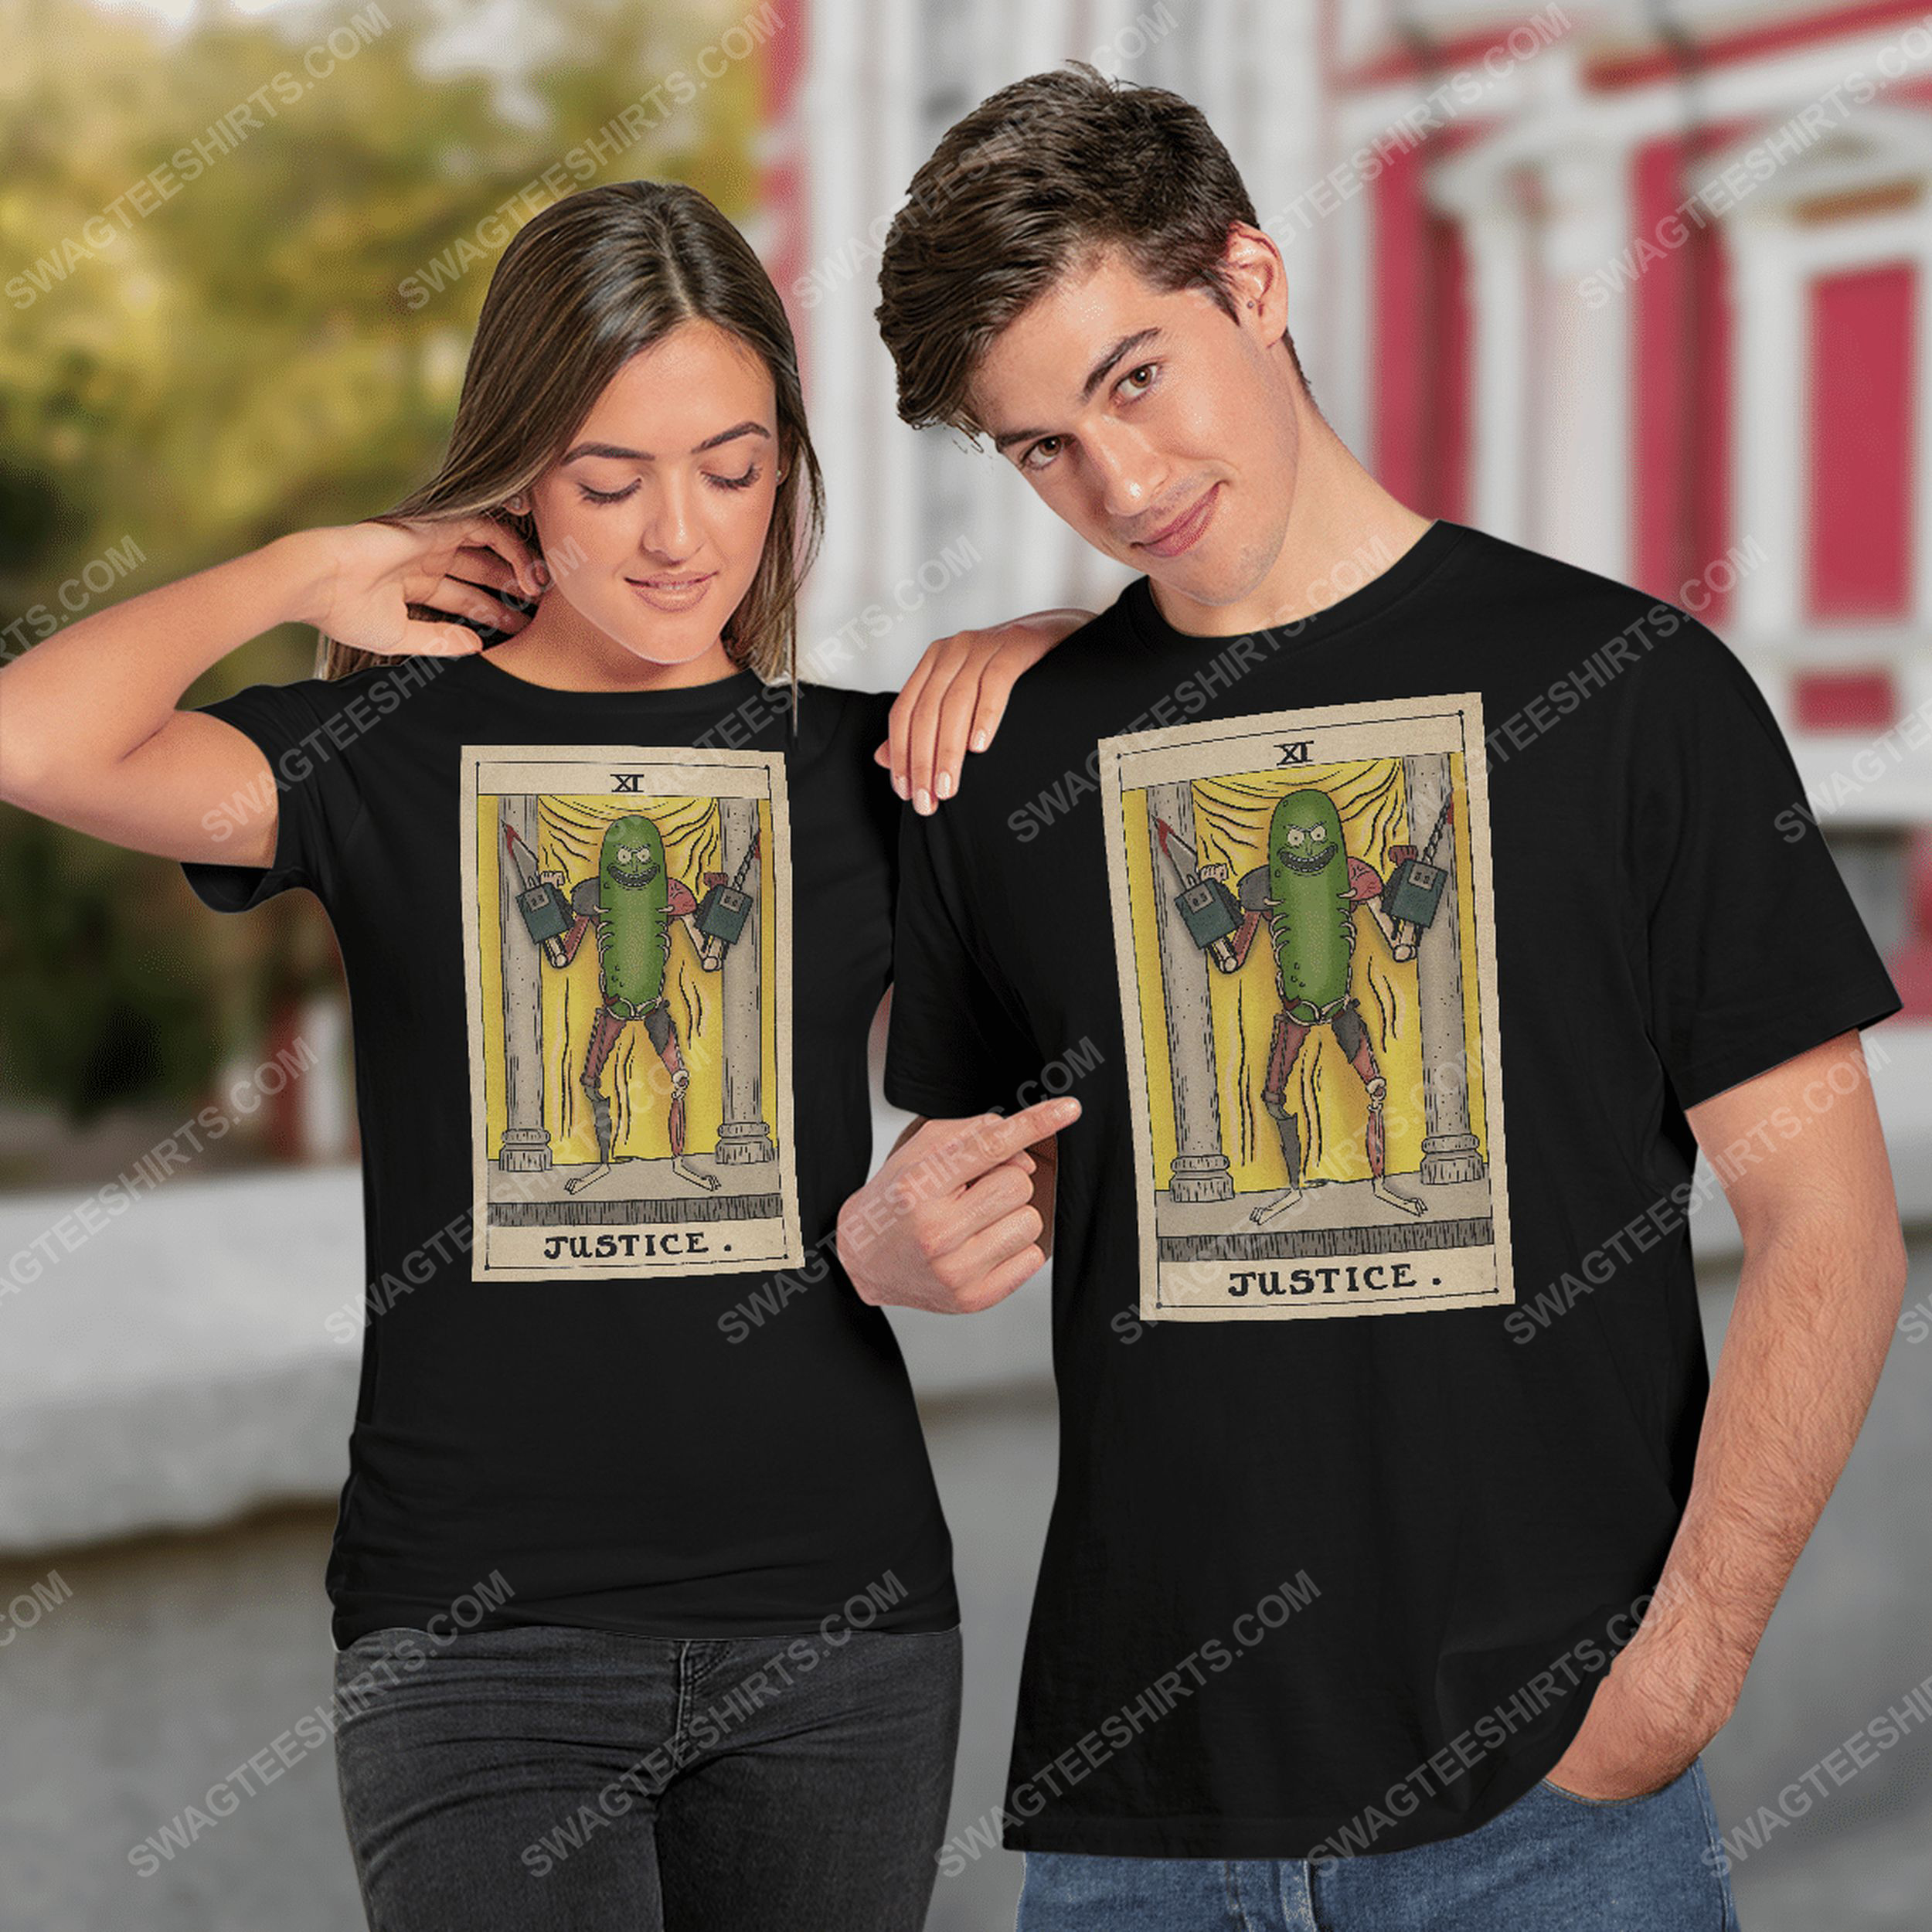 Tv show rick and morty pickle rick justice tarot tshirt(1)